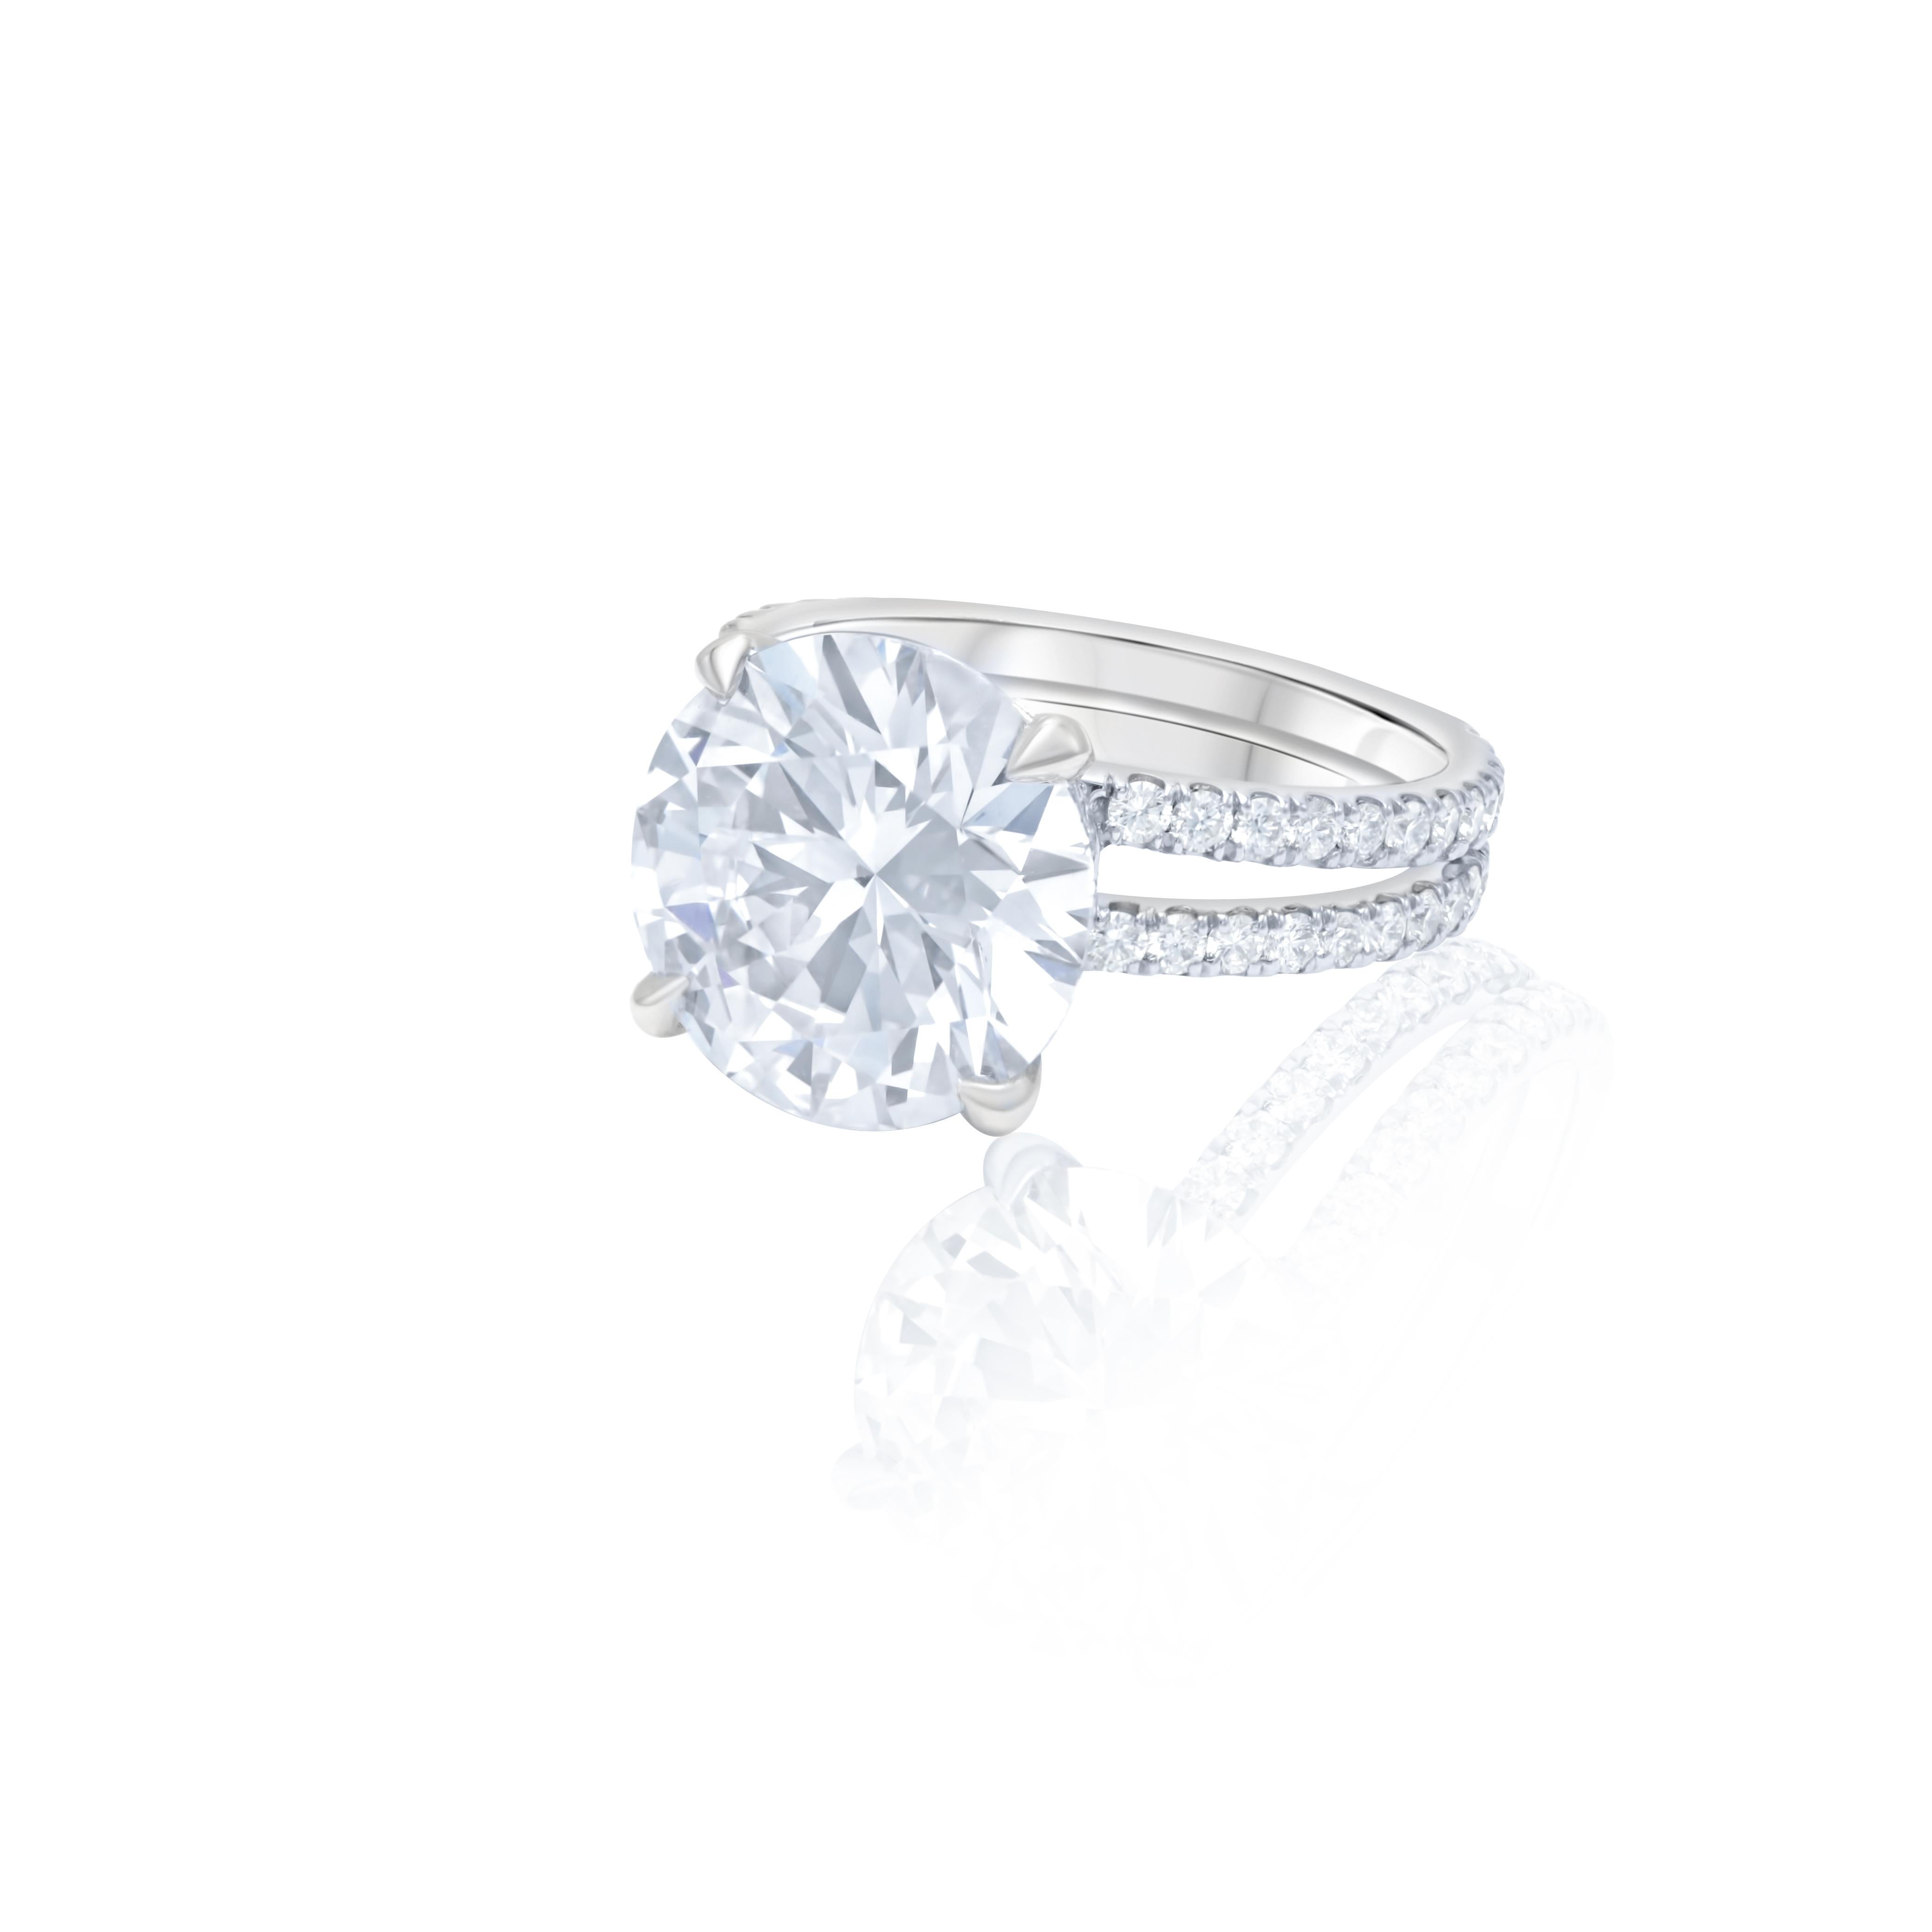 Platinum engagement ring featuring a center 6.30 ct round diamond(gia#2221118307) (G-VS2) with 1.50 cts tw of diamonds on the band
Diana M. is a leading supplier of top-quality fine jewelry for over 35 years.
Diana M is one-stop shop for all your